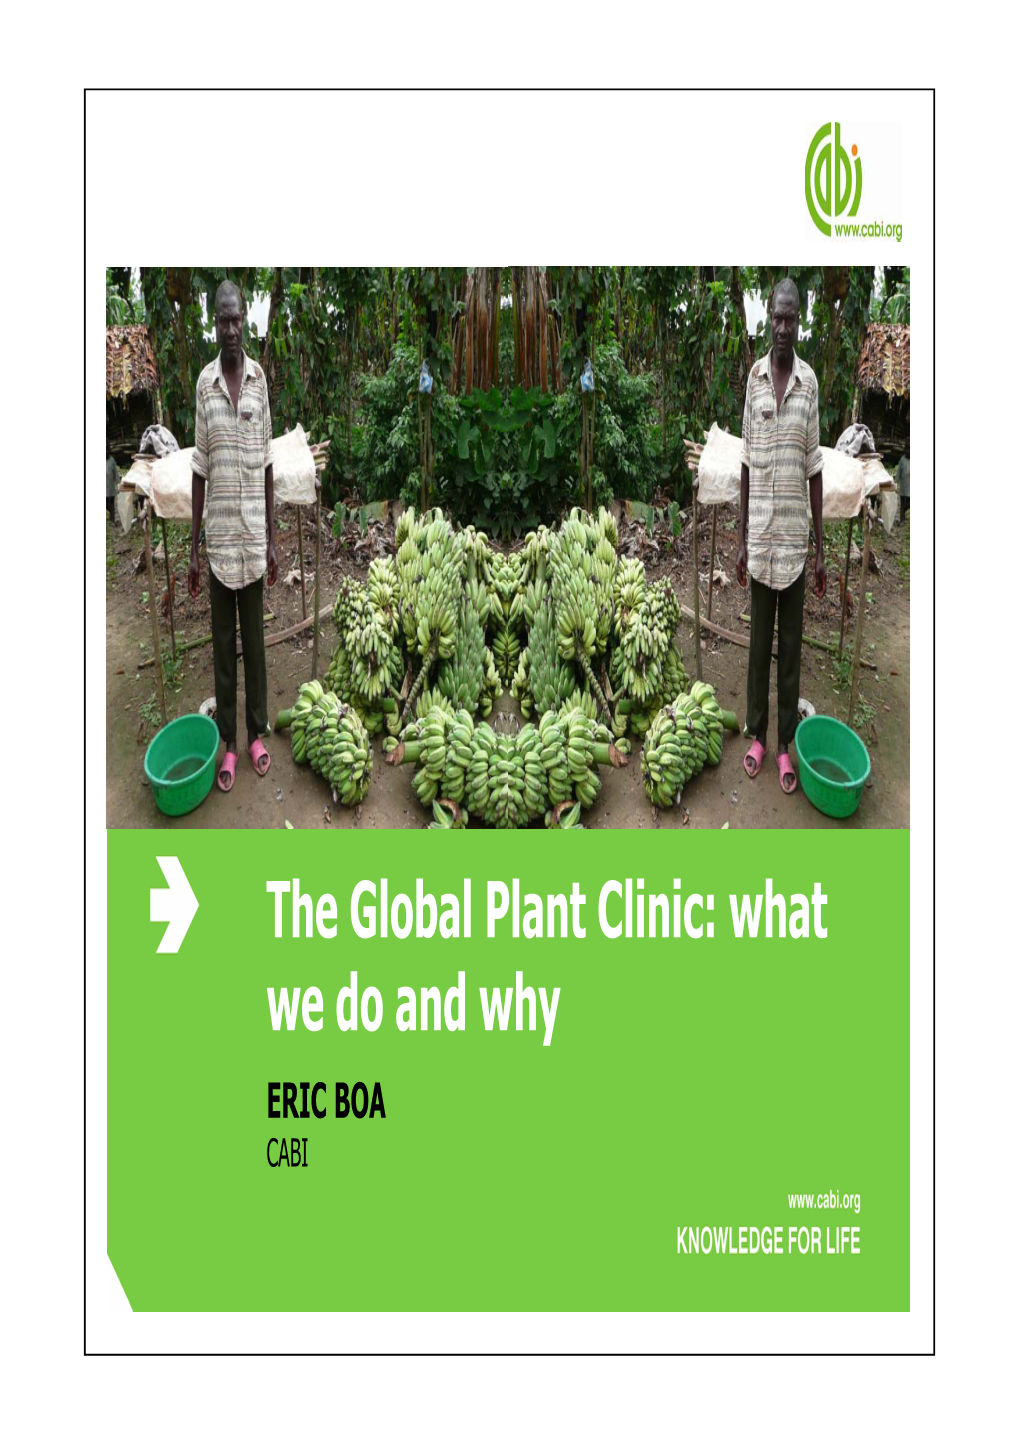 The Global Plant Clinic